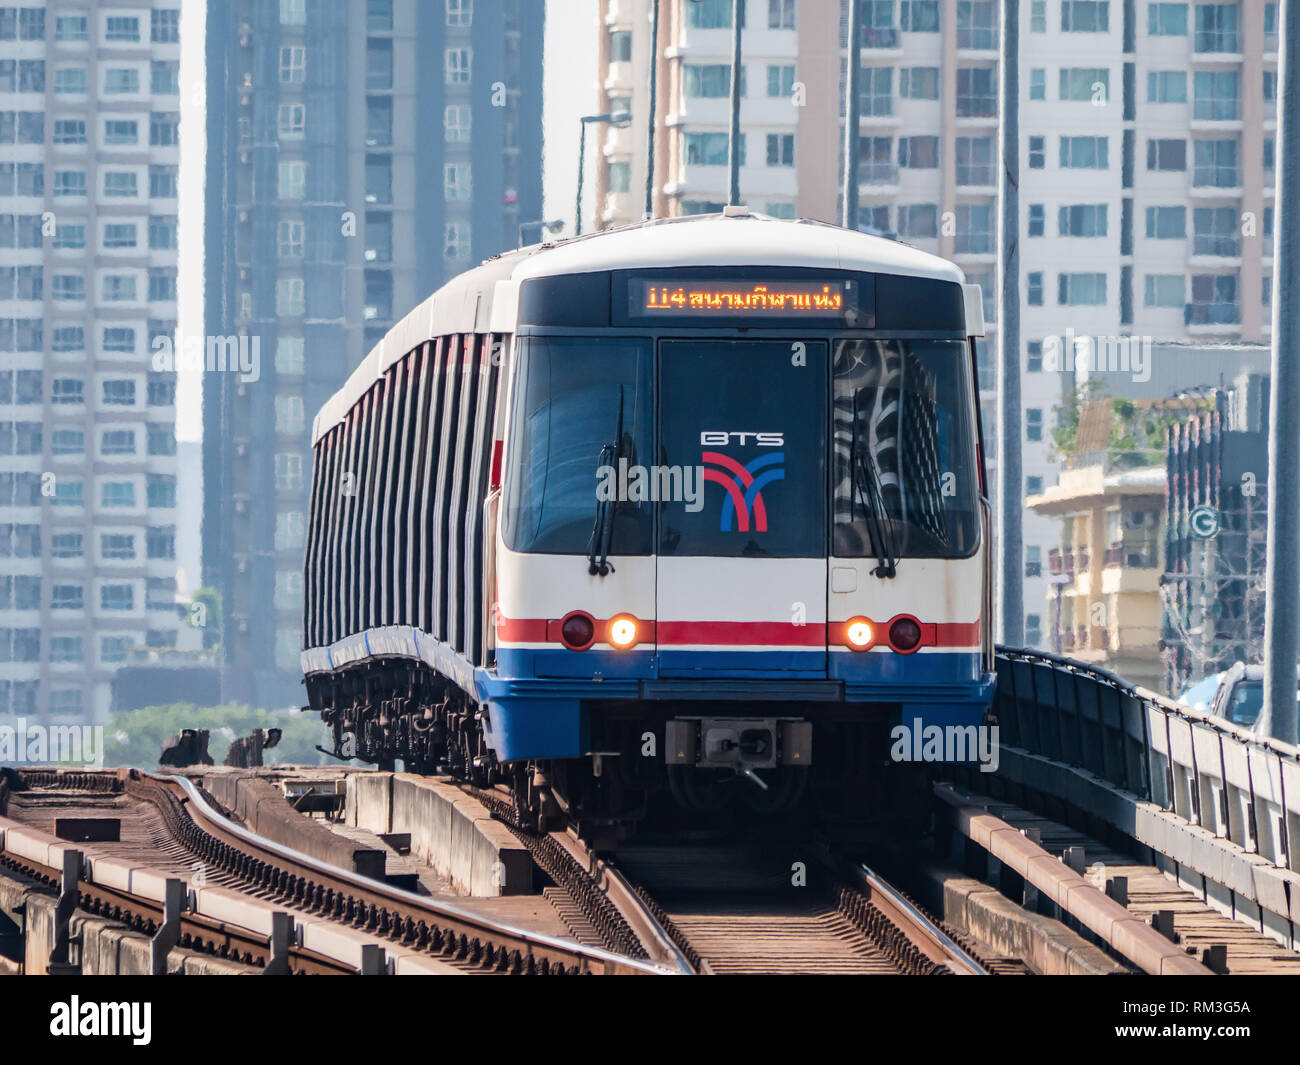 BTS Skytrain, the Silom Line, crossing the Chao Praya river at Saphan Taksin in Bangkok, with hi-rise condominiums in the background. Stock Photo